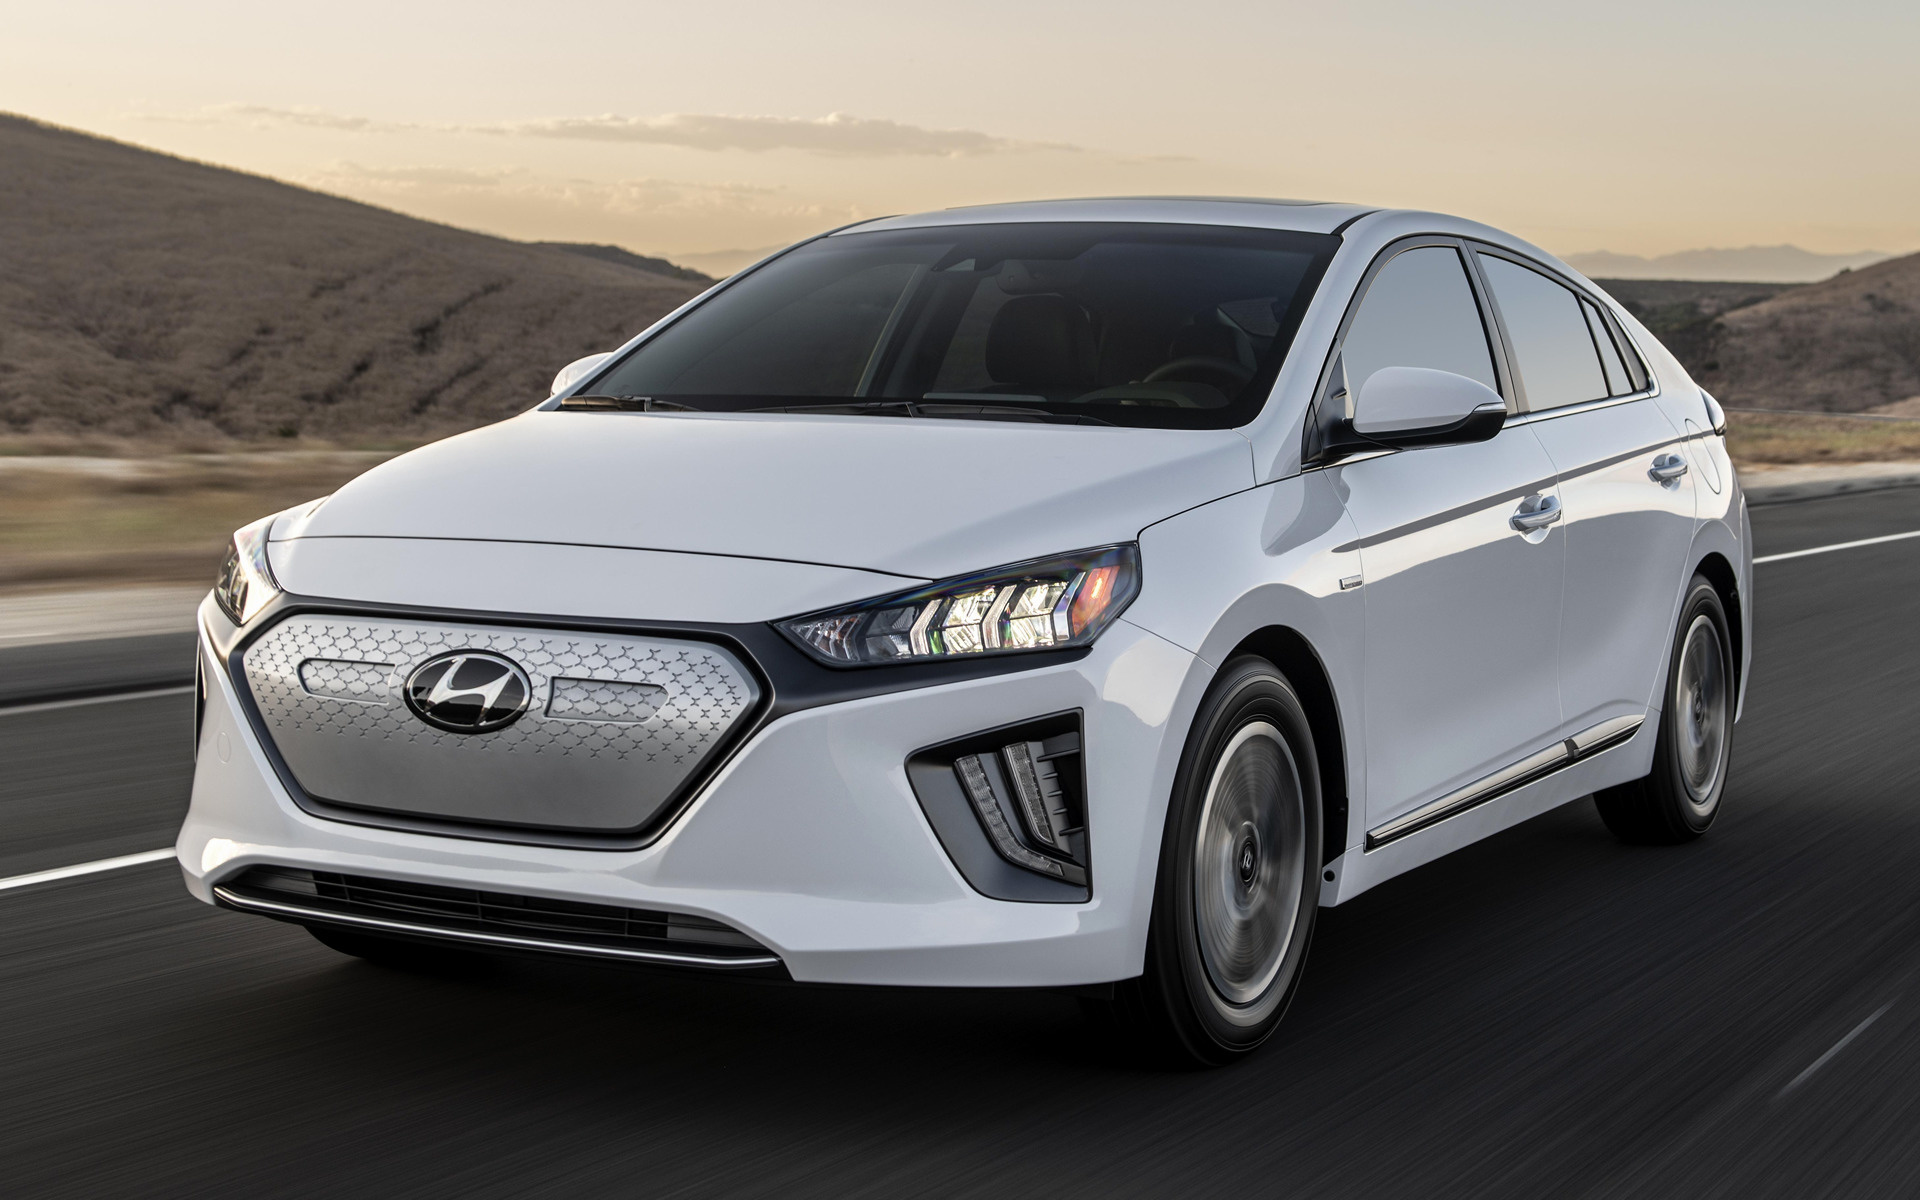 2020 Hyundai Ioniq Electric US Wallpapers and HD Images Car Pixel